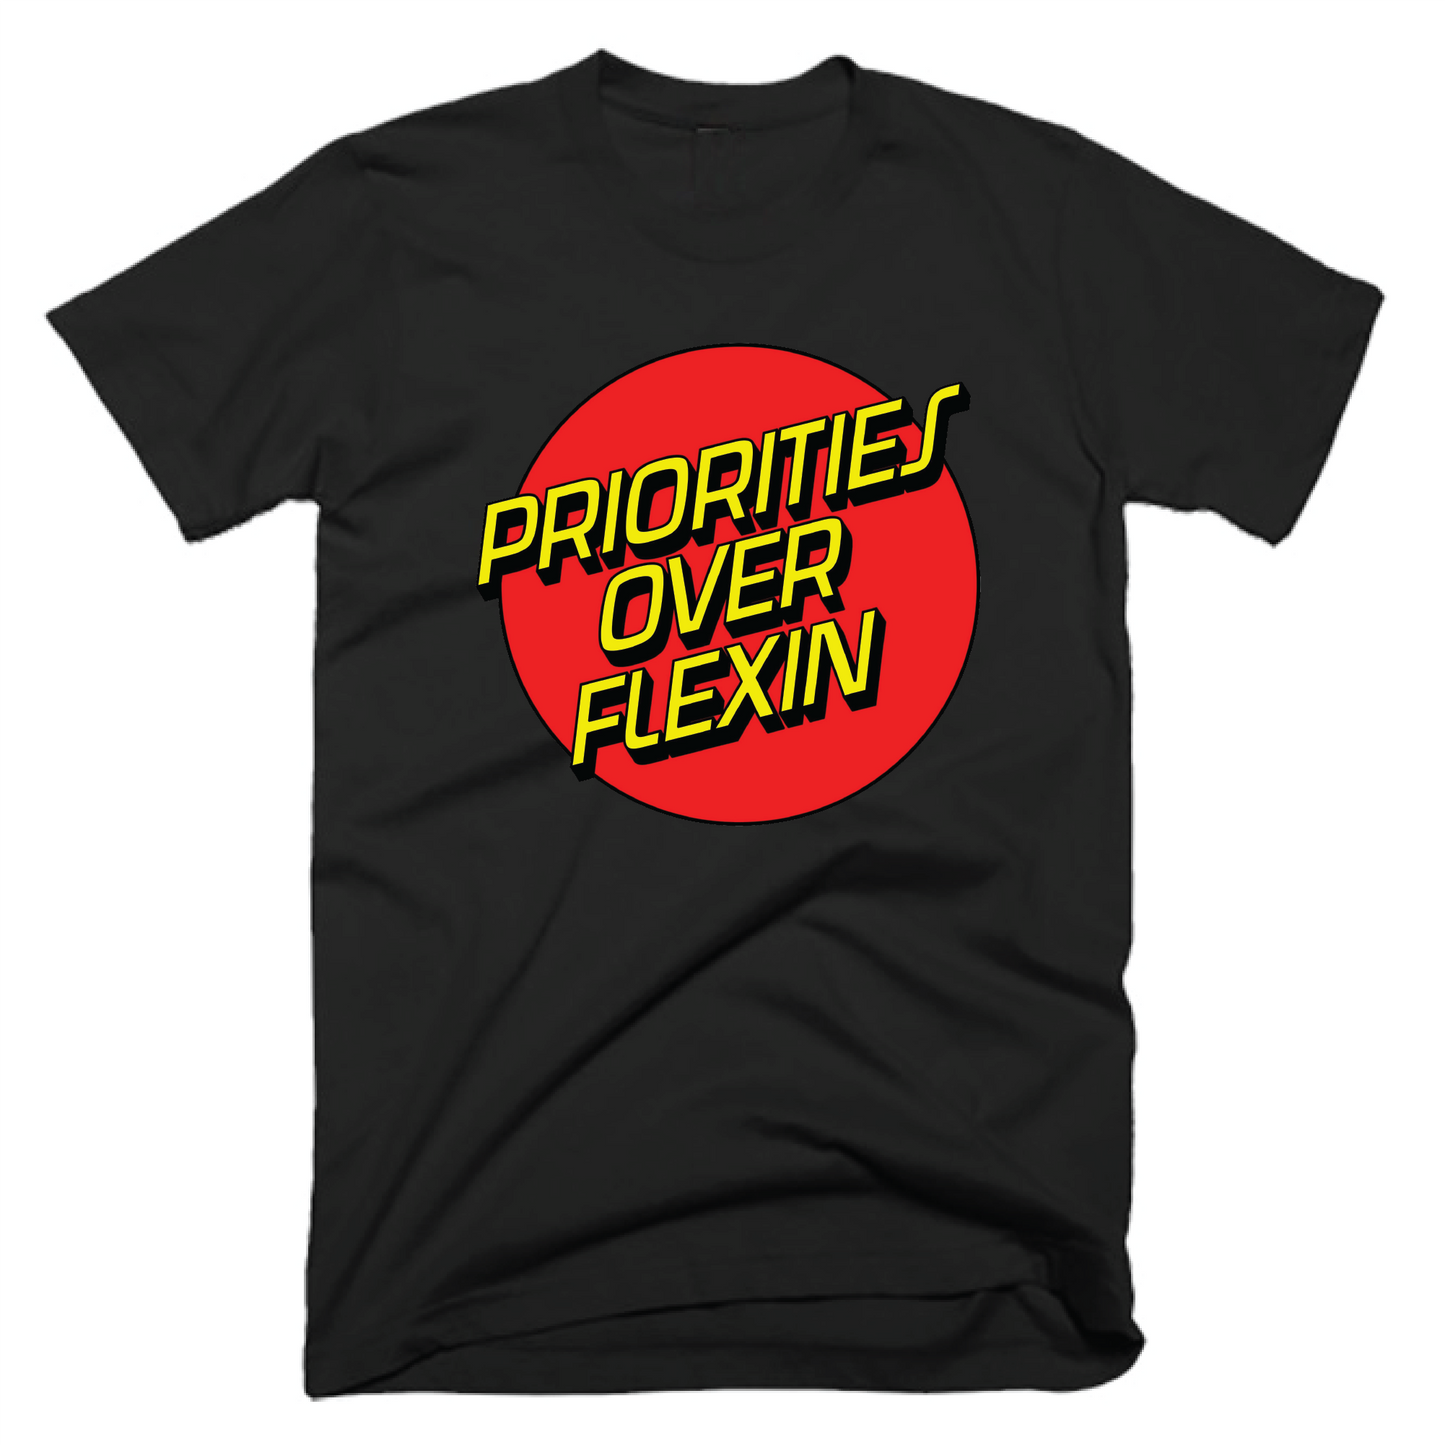 *PRIORITIES over FLEXIN- BACK TO FUTURE- UNISEX FIT